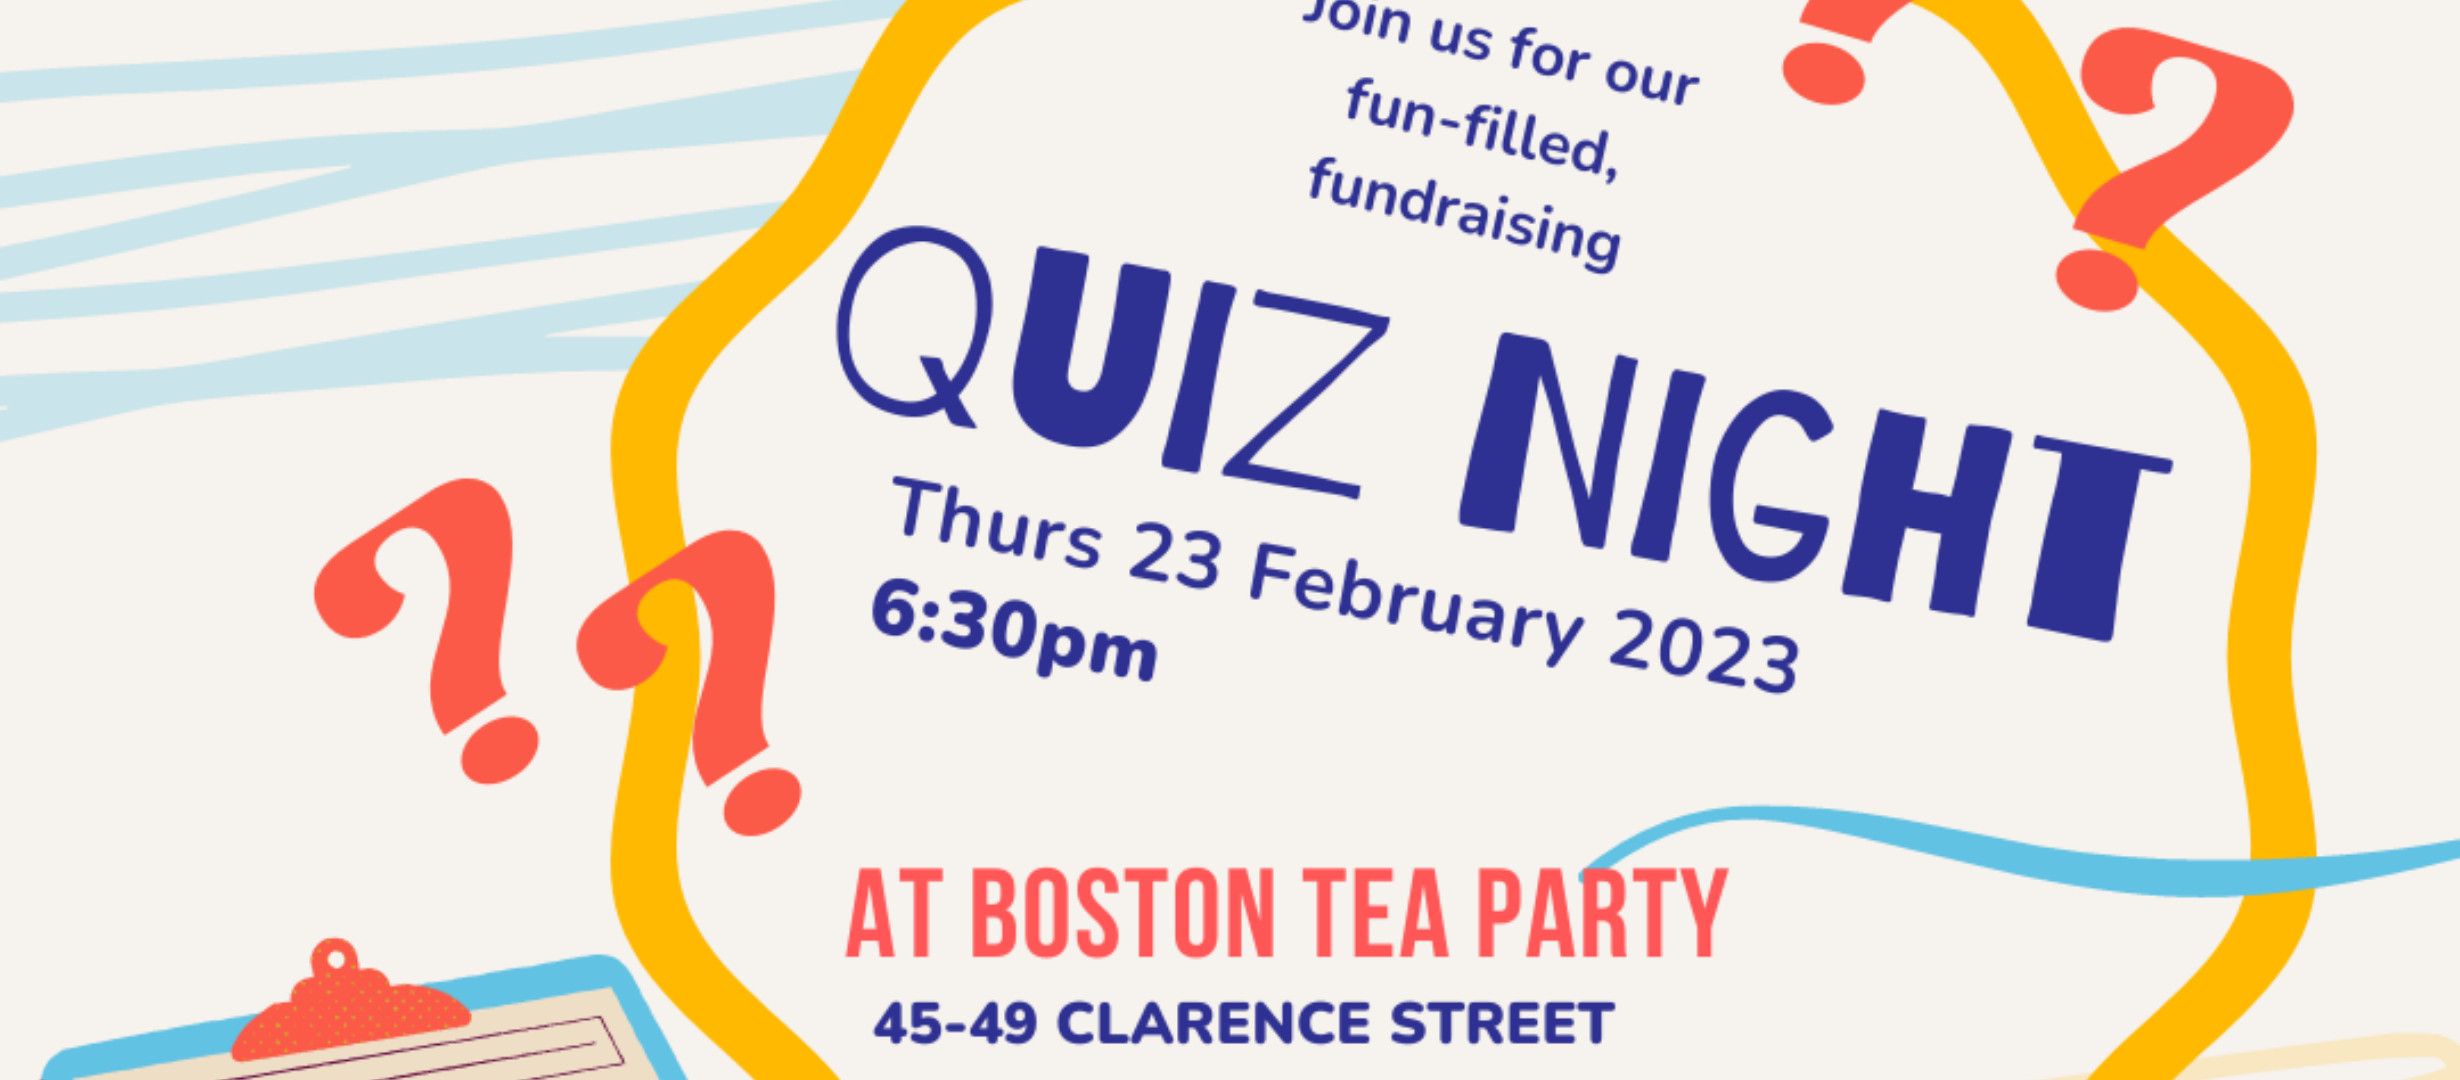 This is the flyer for the quiz with the same information as the main text.